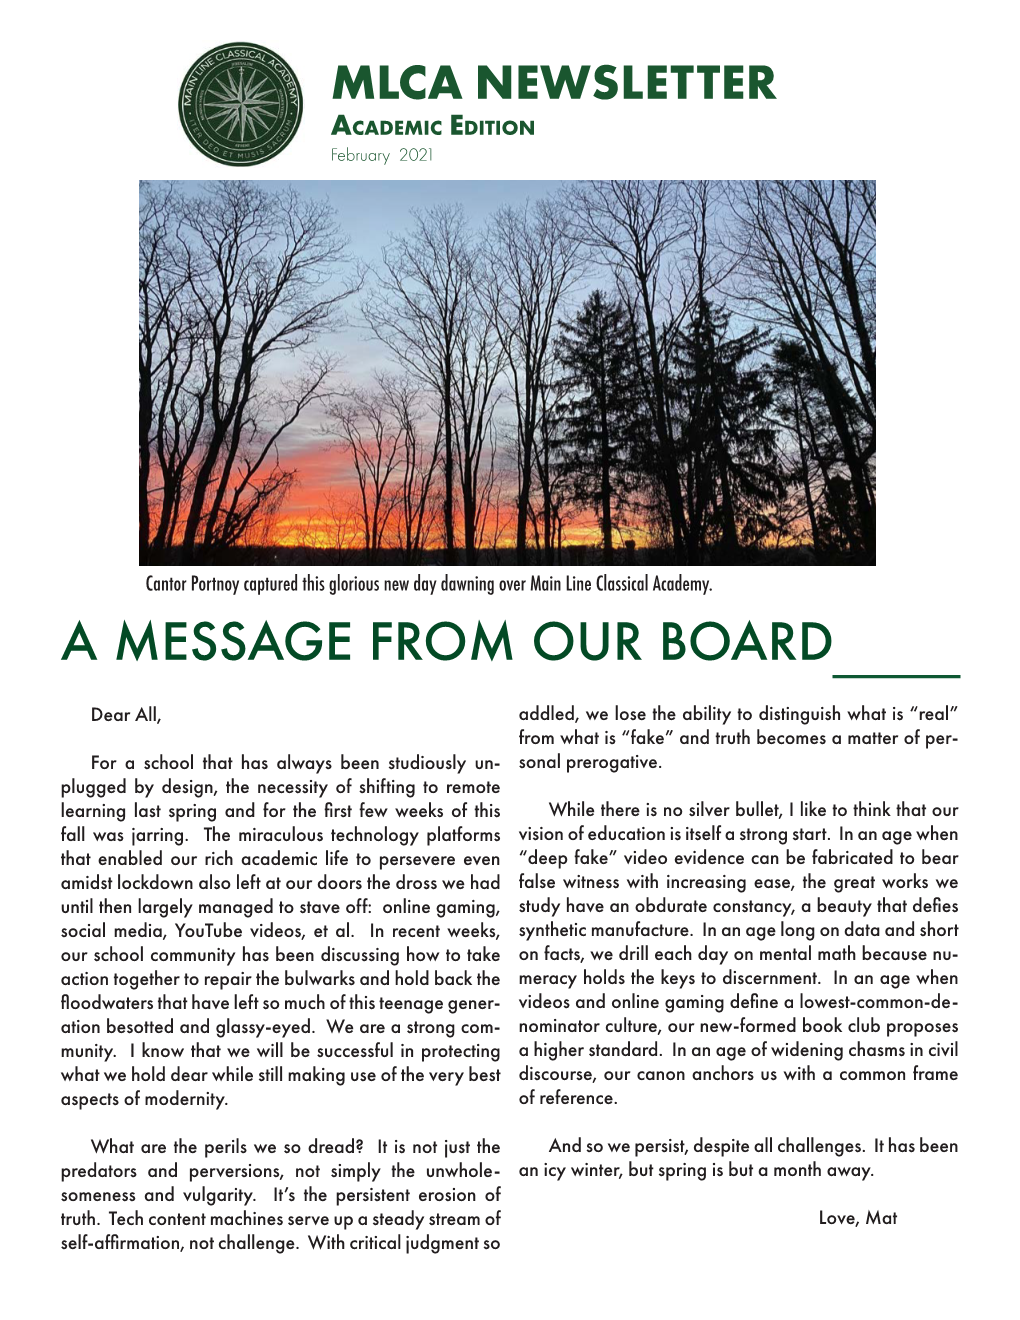 Mlca Newsletter a Message from Our Board